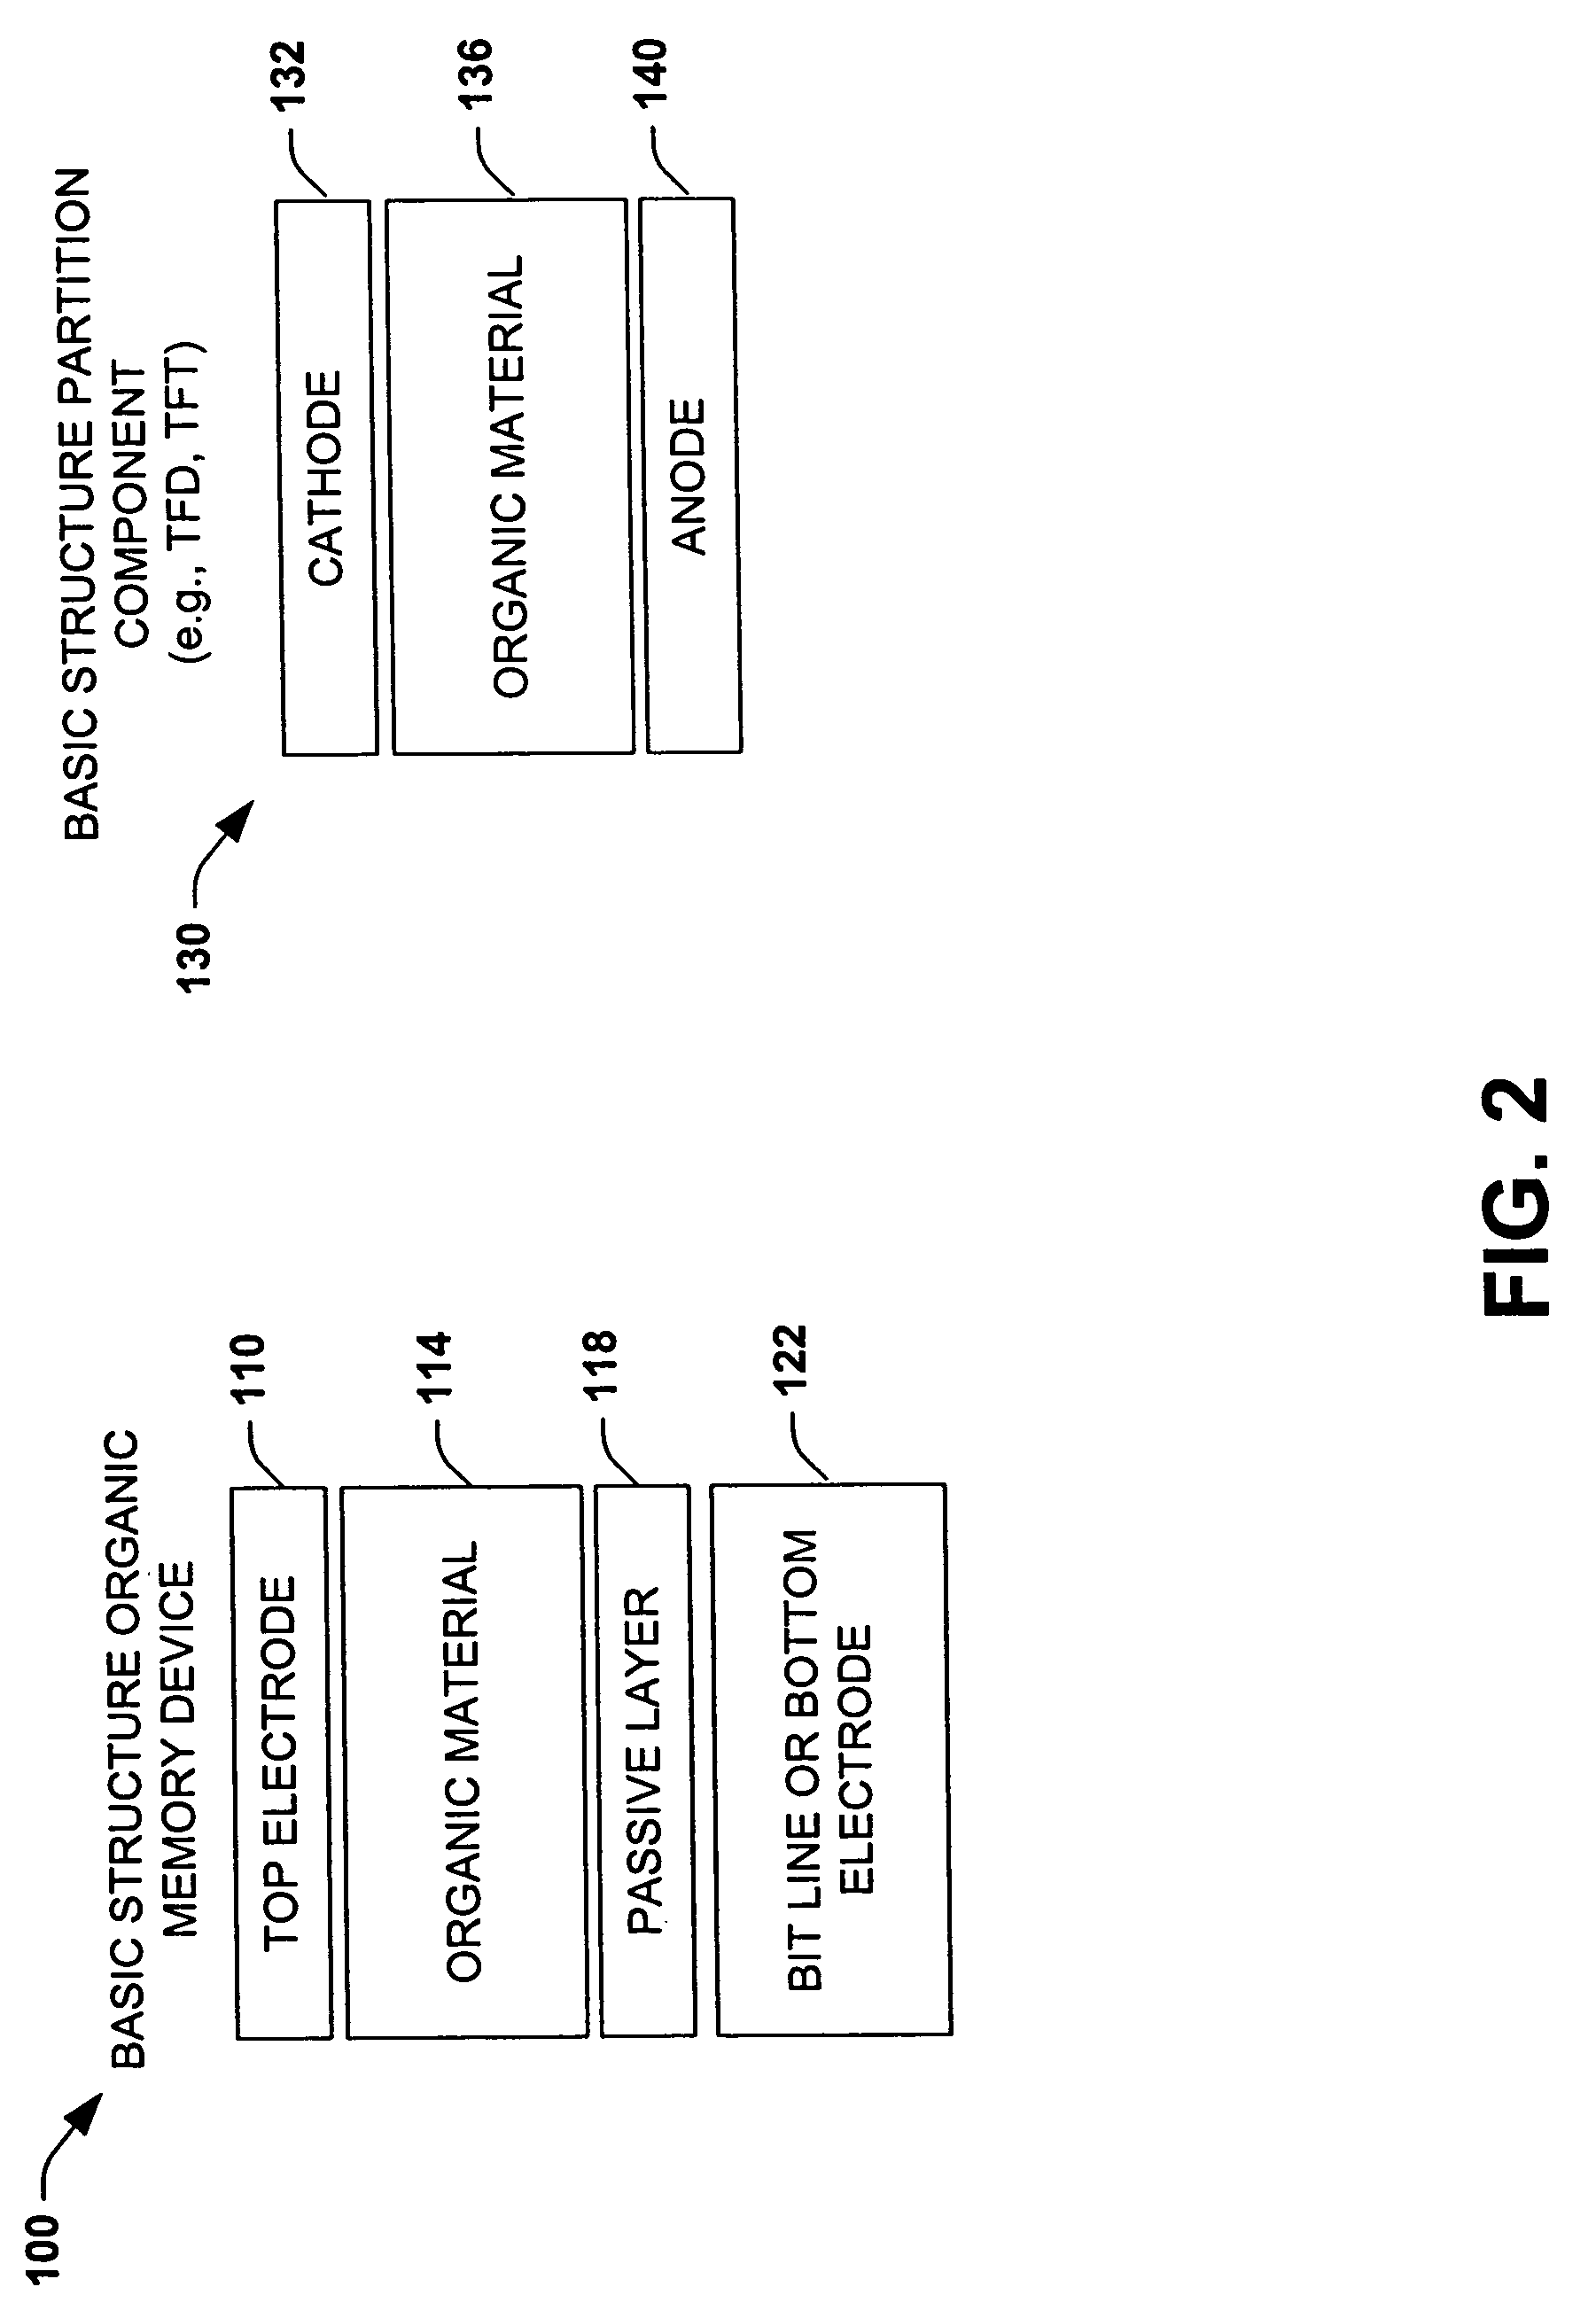 Stacked organic memory devices and methods of operating and fabricating